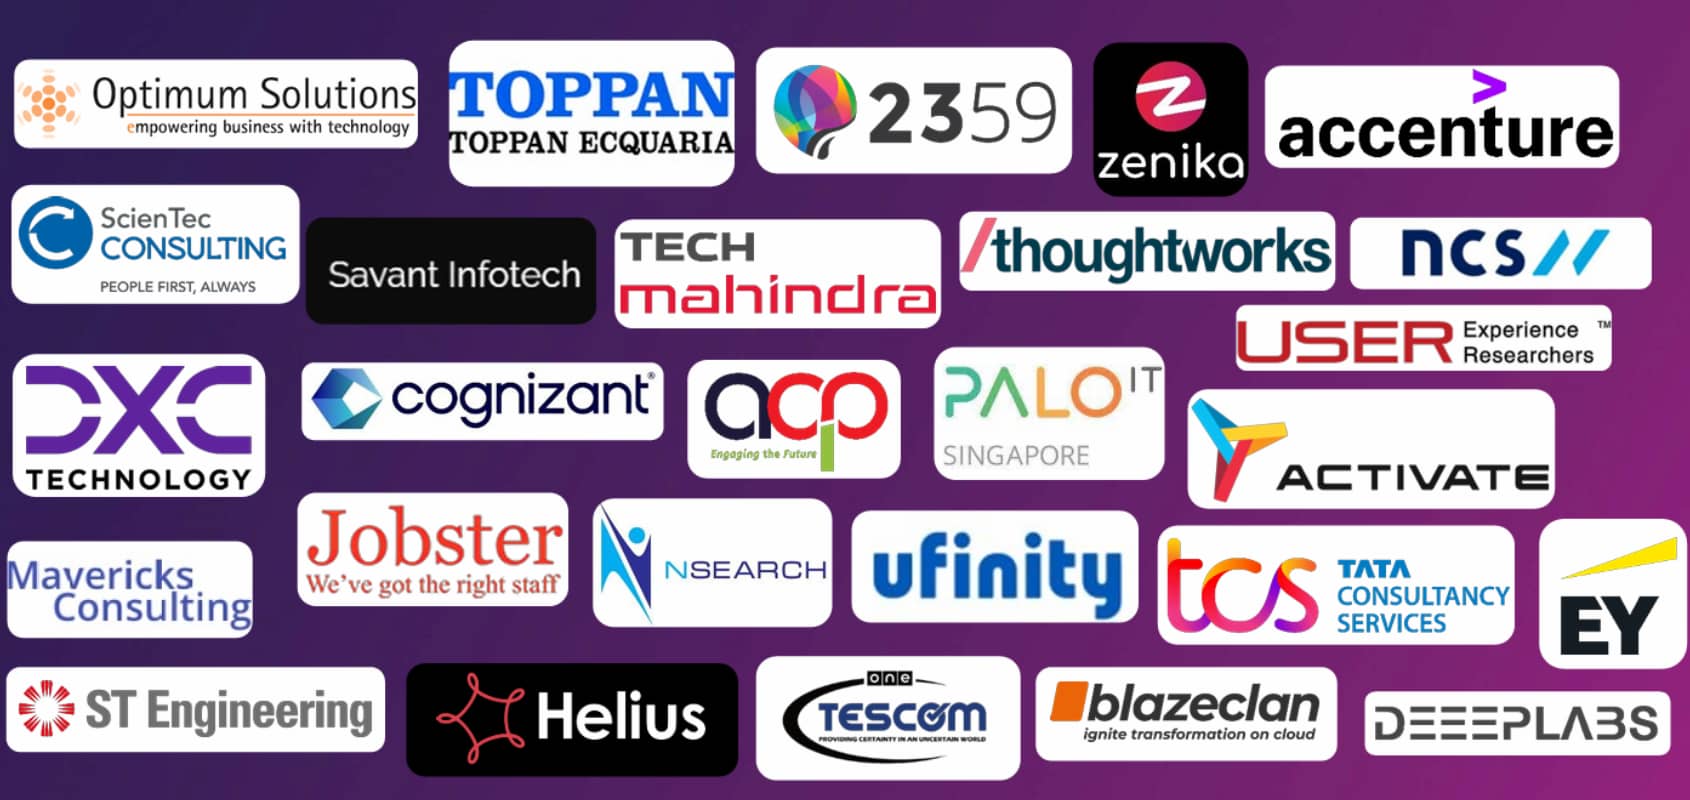 Image collage depicting the 27 industry partners of GovTech, which include various industries.